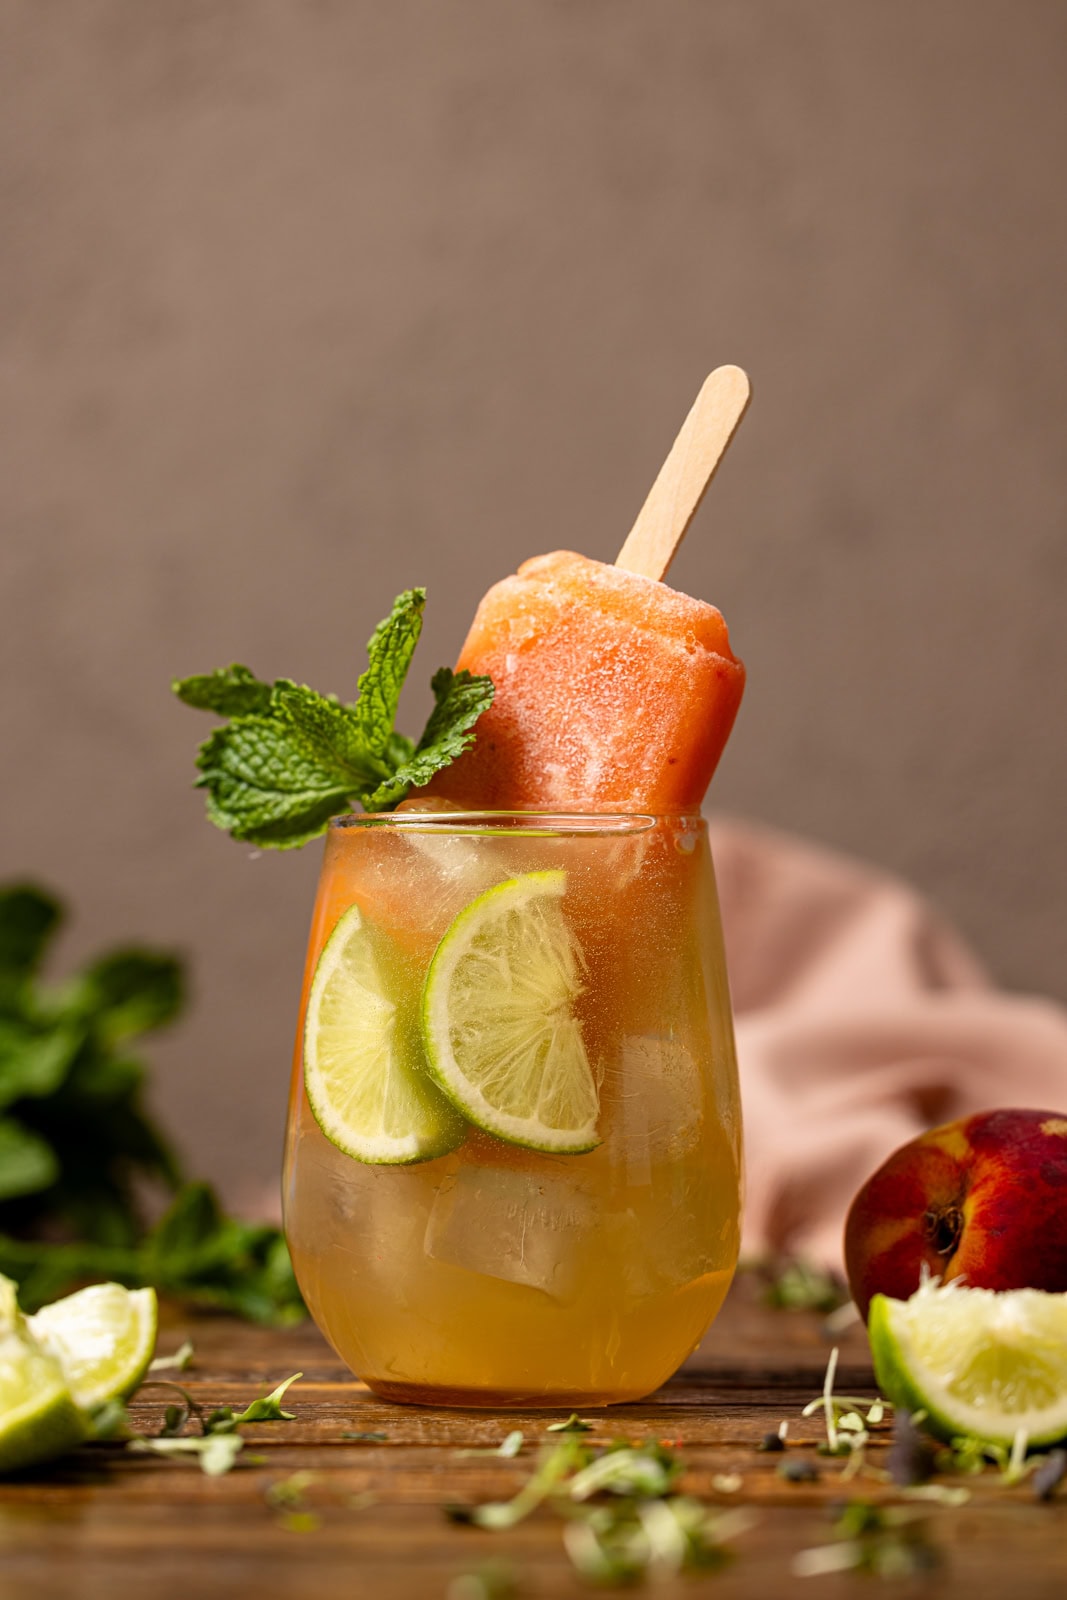 Mocktail drink with popsicle, lime, and a peach.